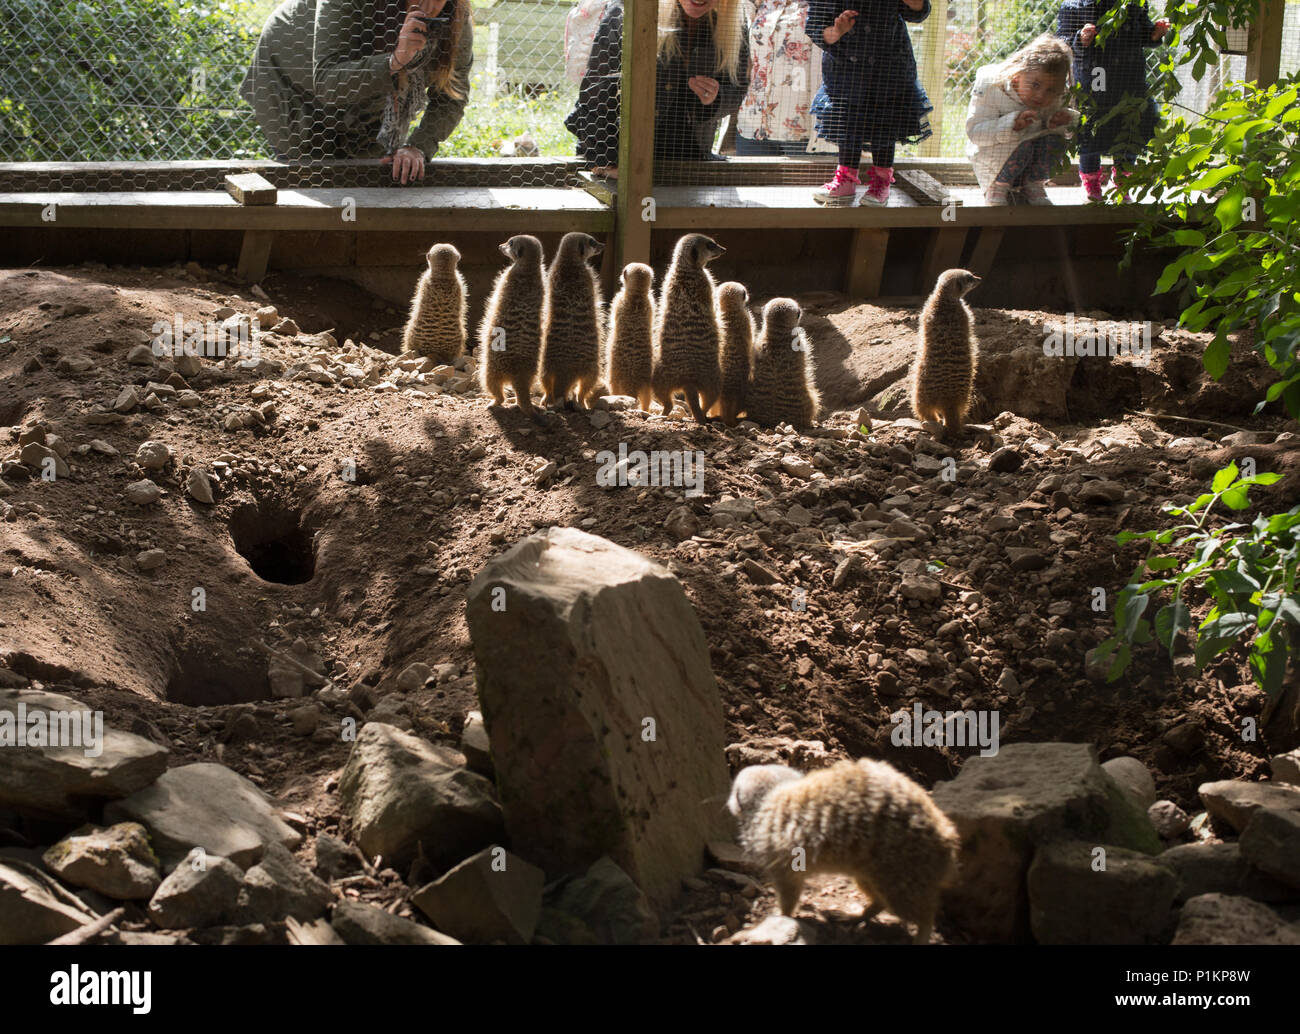 A family of Meerkats stare out of their enclosure at a group of people Stock Photo